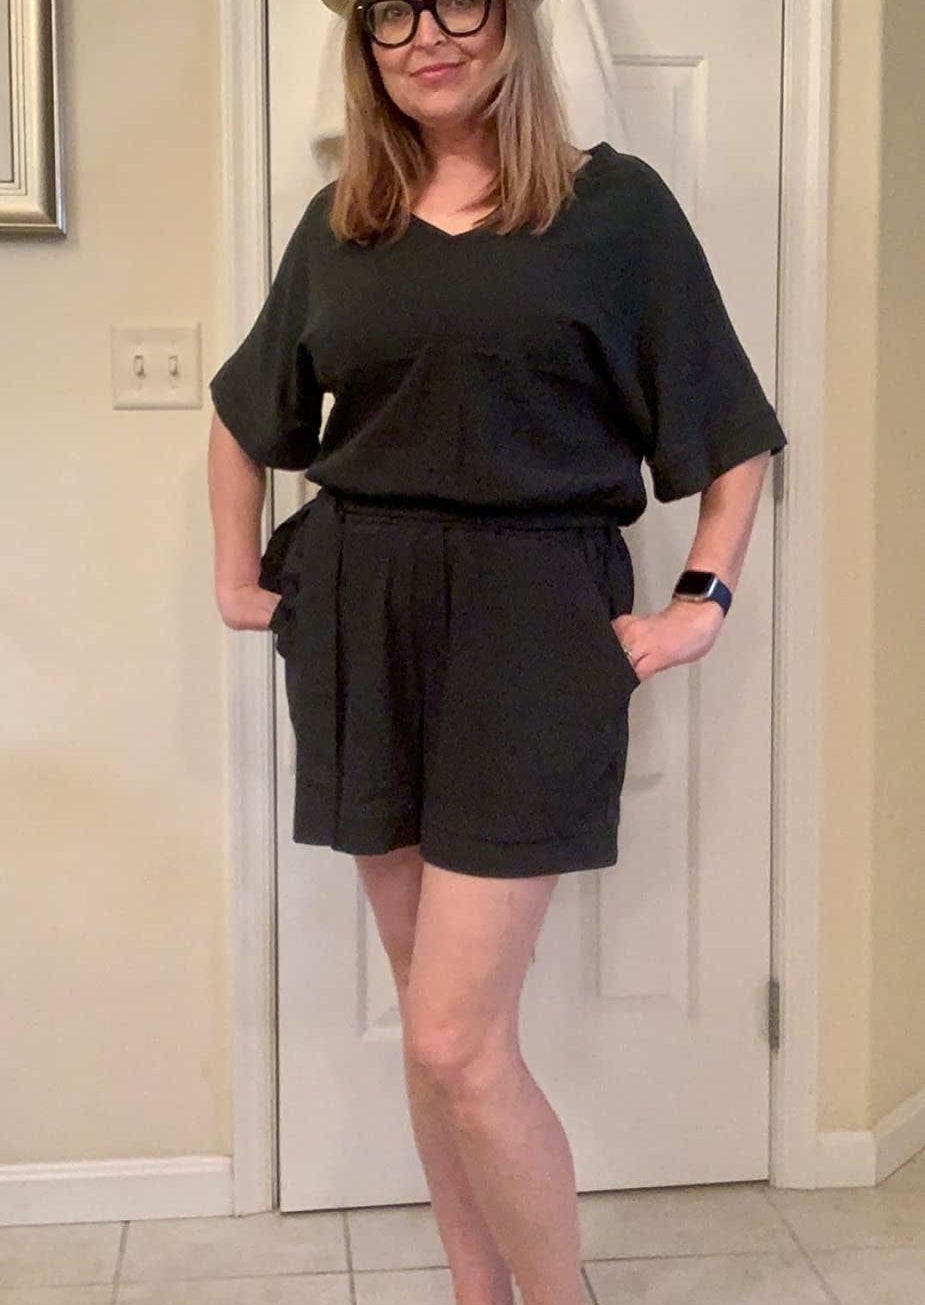 Reviewer in the black short sleeve romper